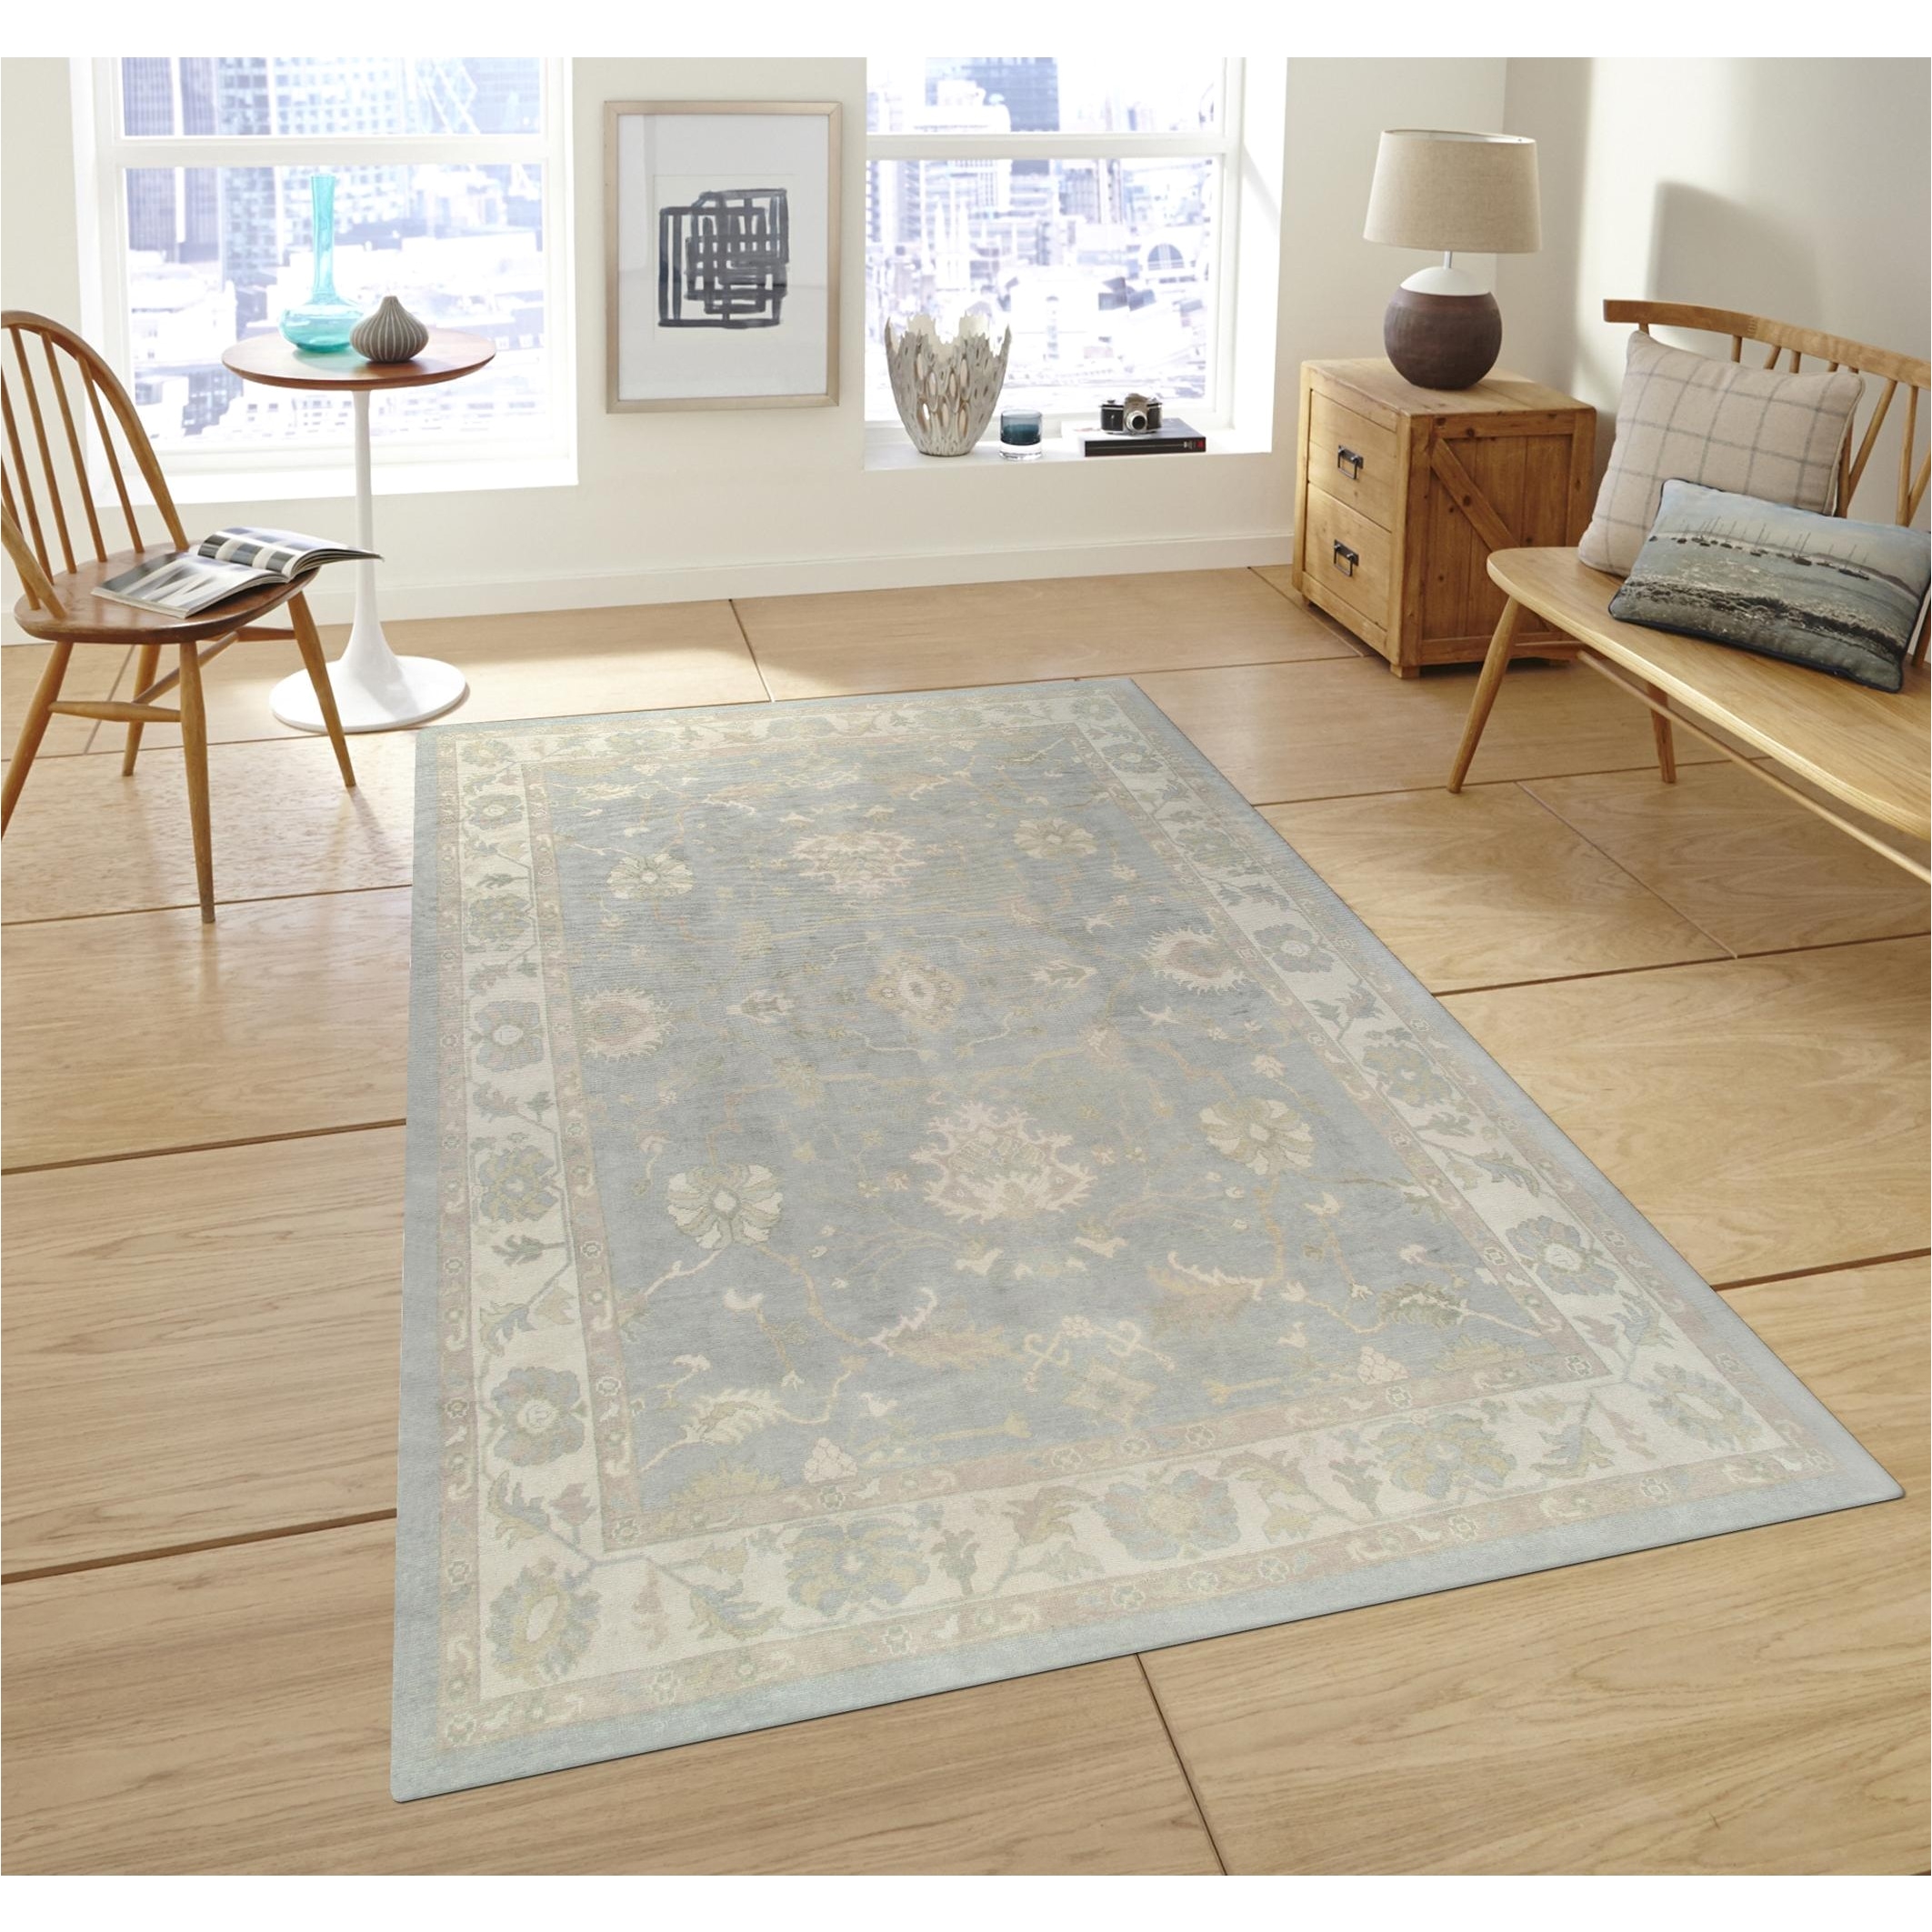 cheap pictures of elegant x area rug february with designer area rug